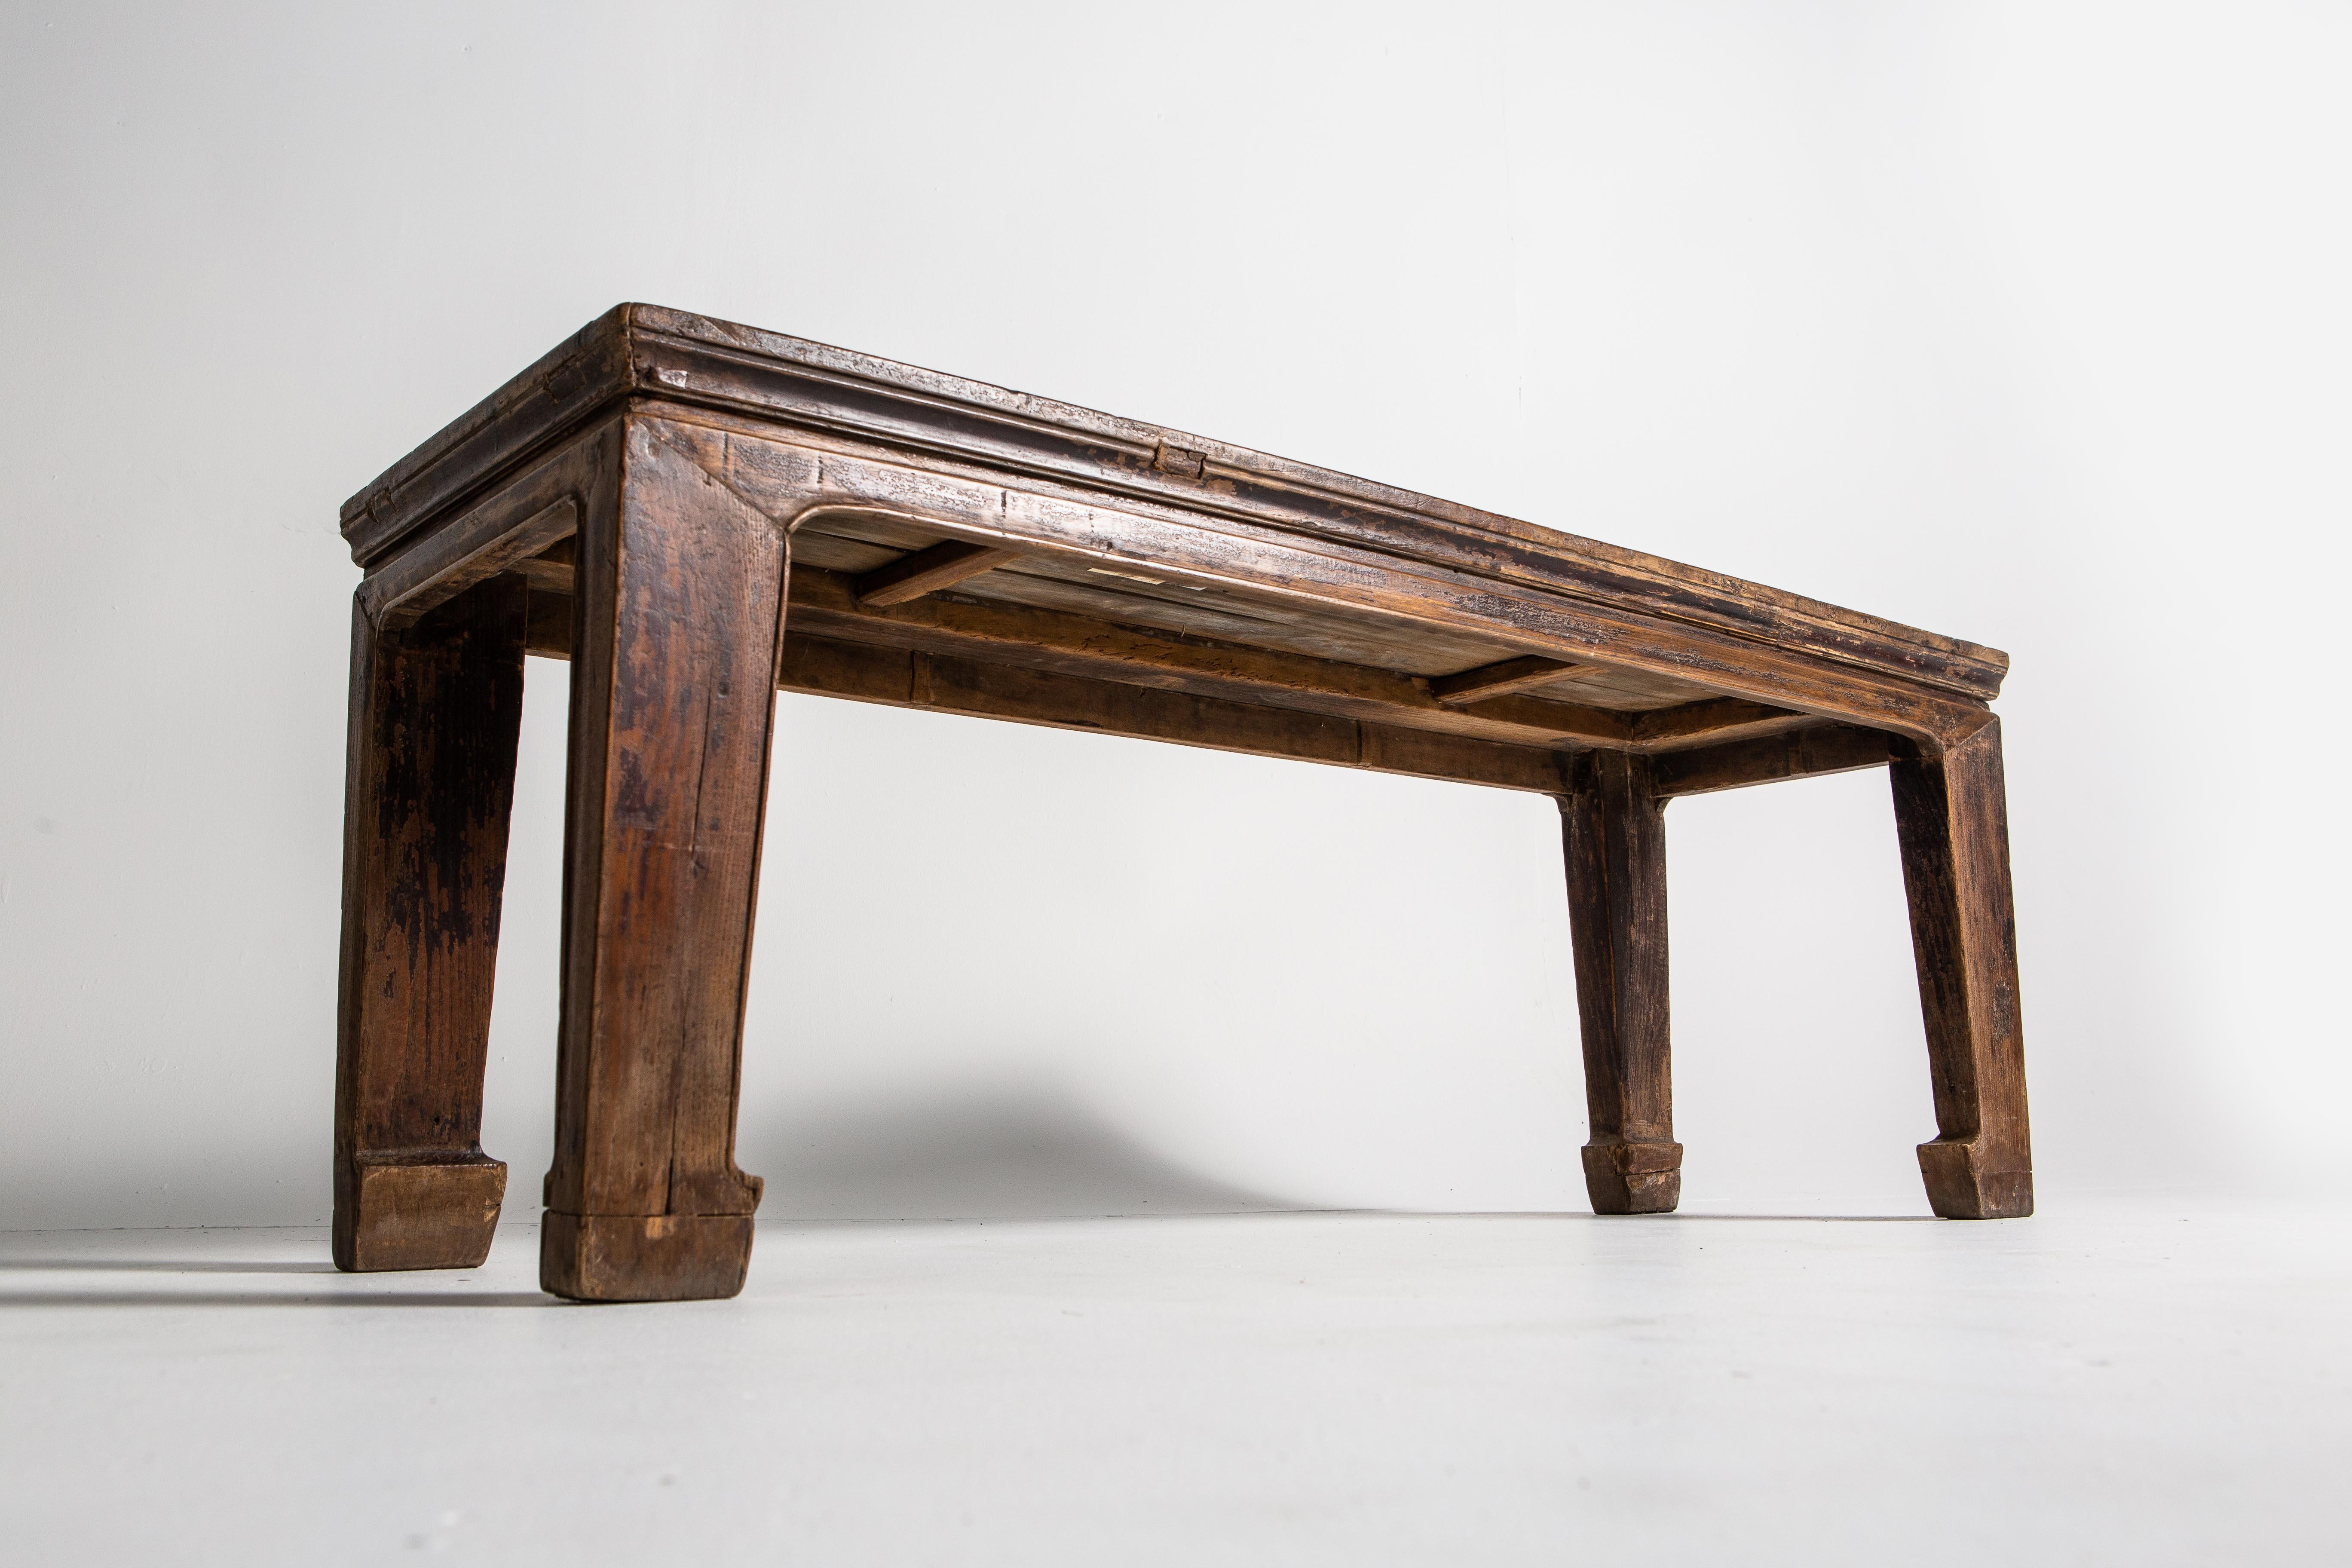 This narrow-waisted elm wood bench features horse hoof legs and an all-original oxblood lacquer finish. Due to long use, much of the original lacquer has worn off, particularly around the feet. The piece can be bees-waxed for a more lustrous finish.